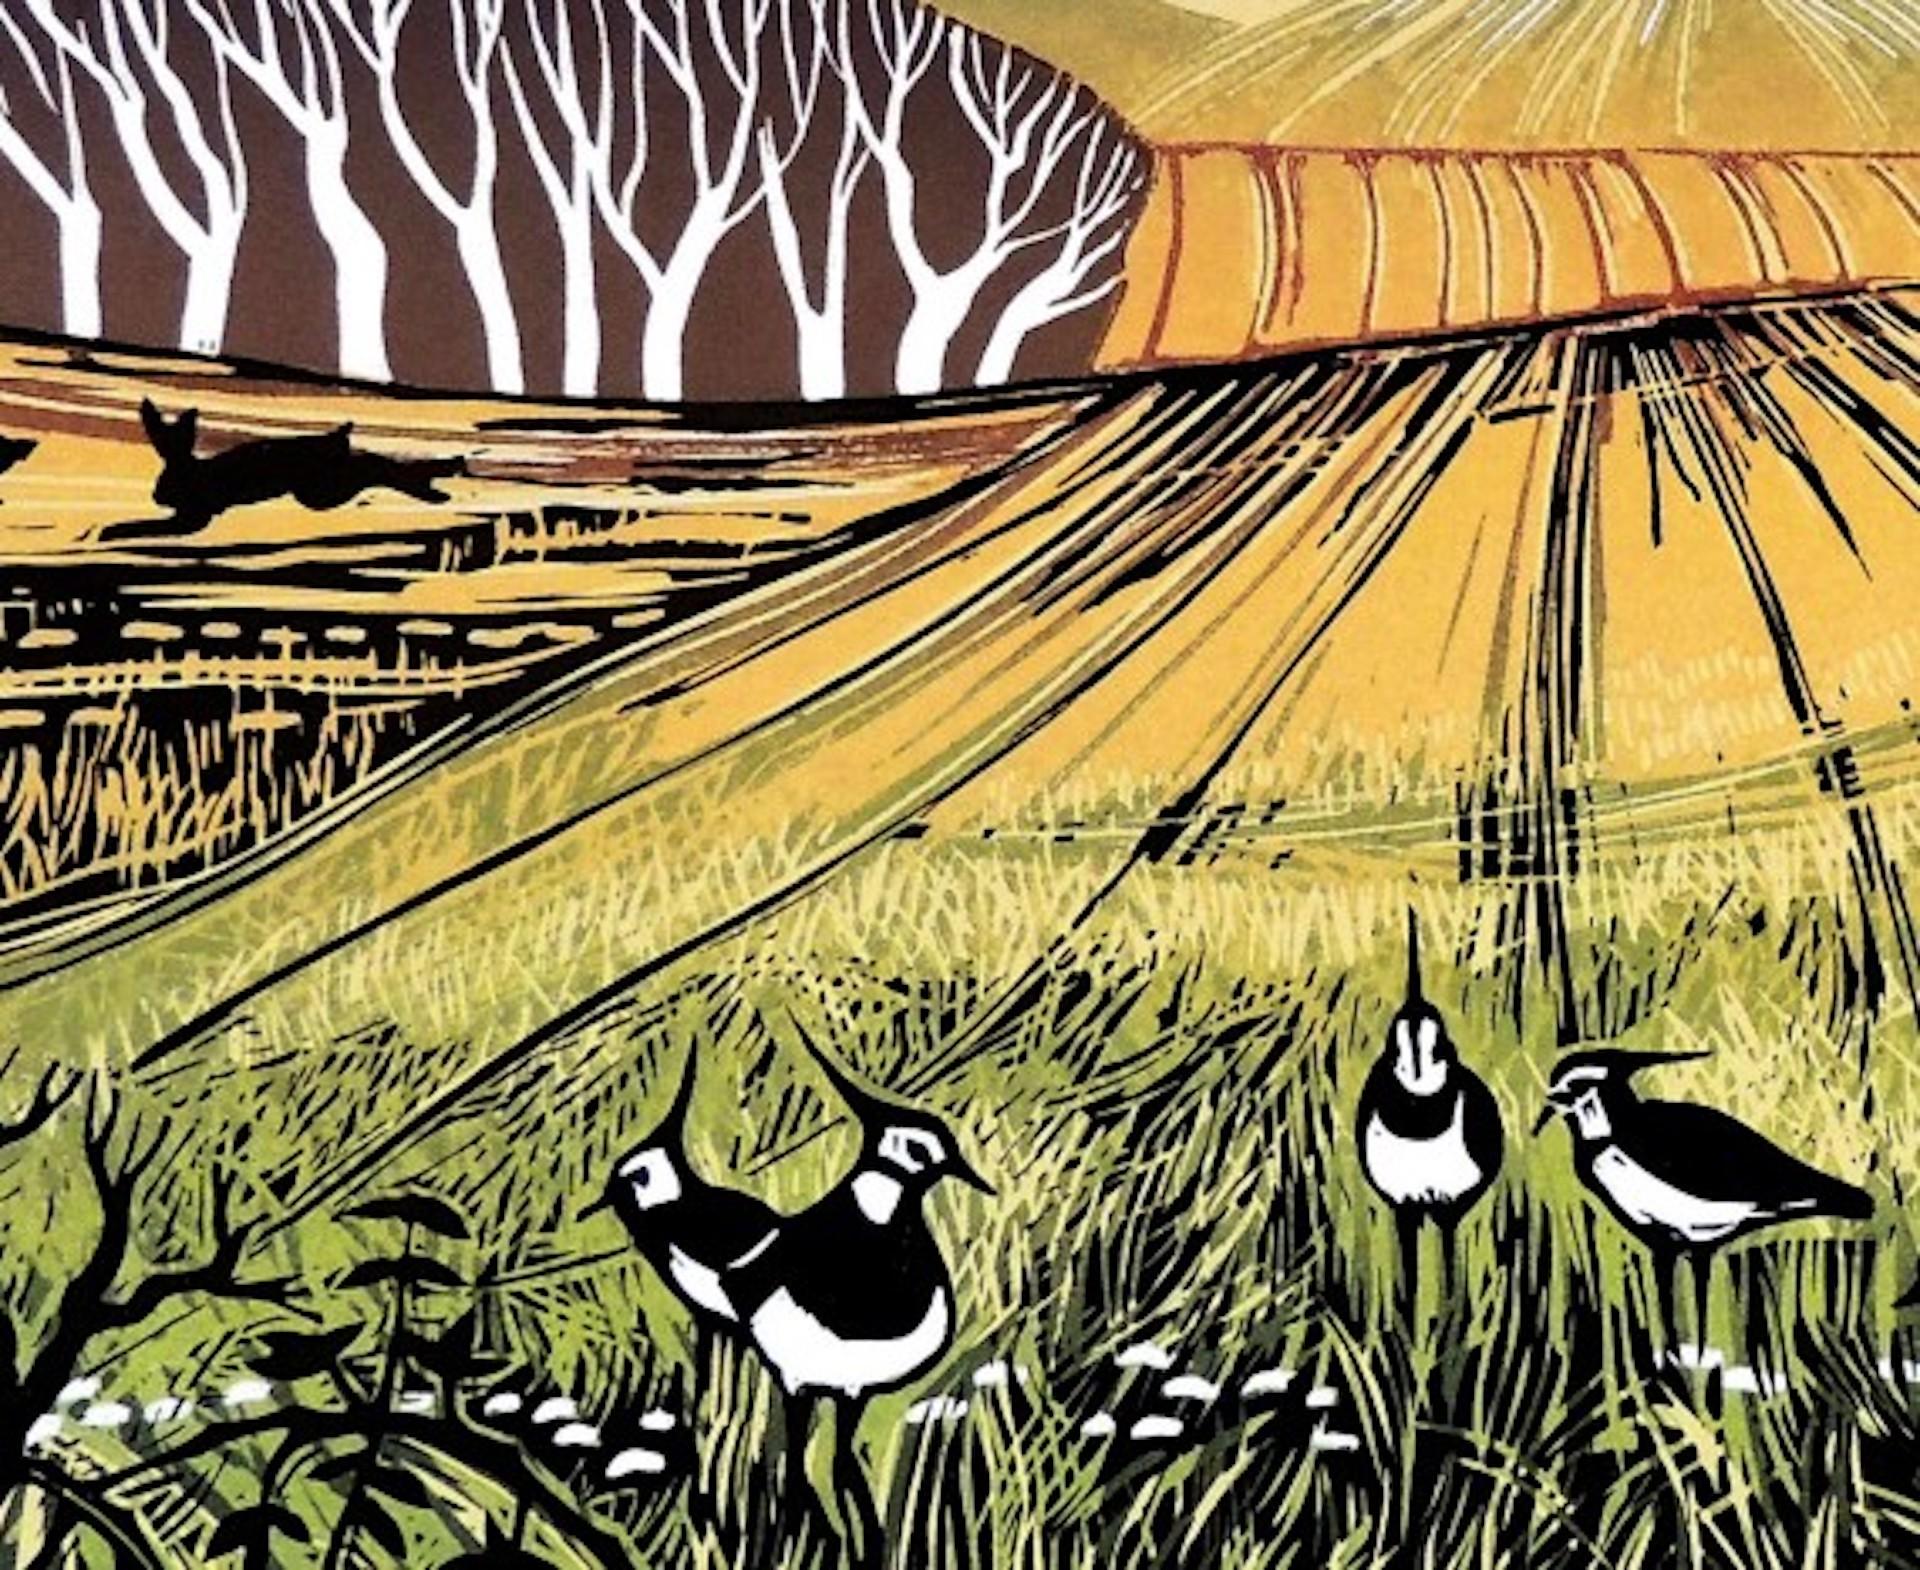 A Fine Day For Lapwings by Rob Barnes [2021]
limited edition

Linocut

Edition of 50 in edition

Image size: H:30 cm x W:44 cm

Complete Size of Unframed Work: H:49 cm x W:61 cm x D:0.02cm

Sold Unframed

Please note that insitu images are purely an